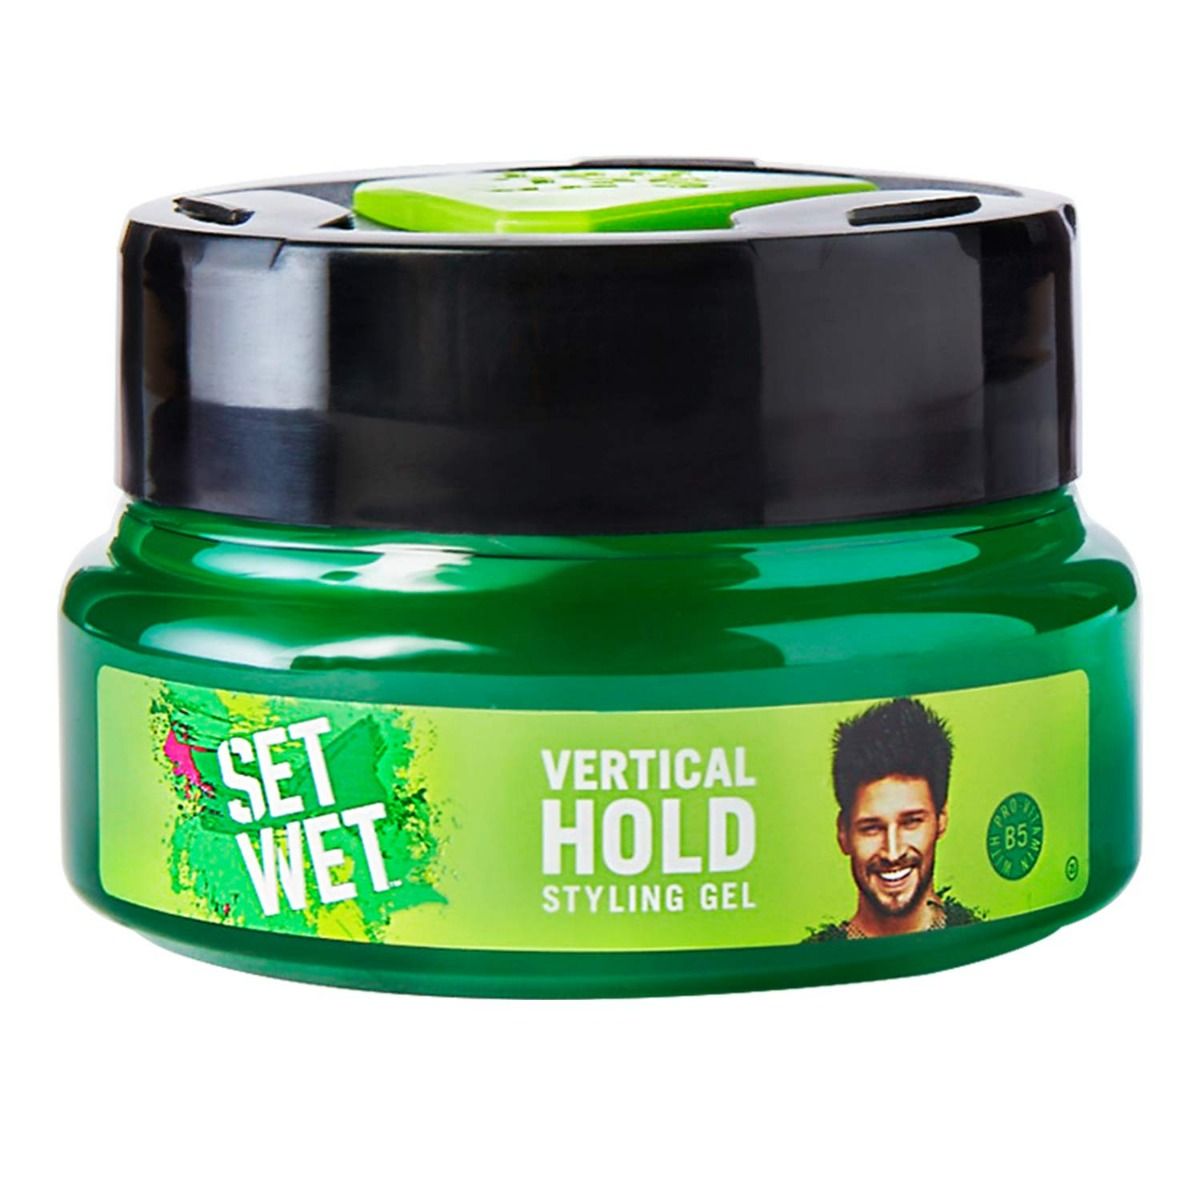 Set Wet Vertical Hold Hair Gel, 250 ml Price, Uses, Side Effects ...